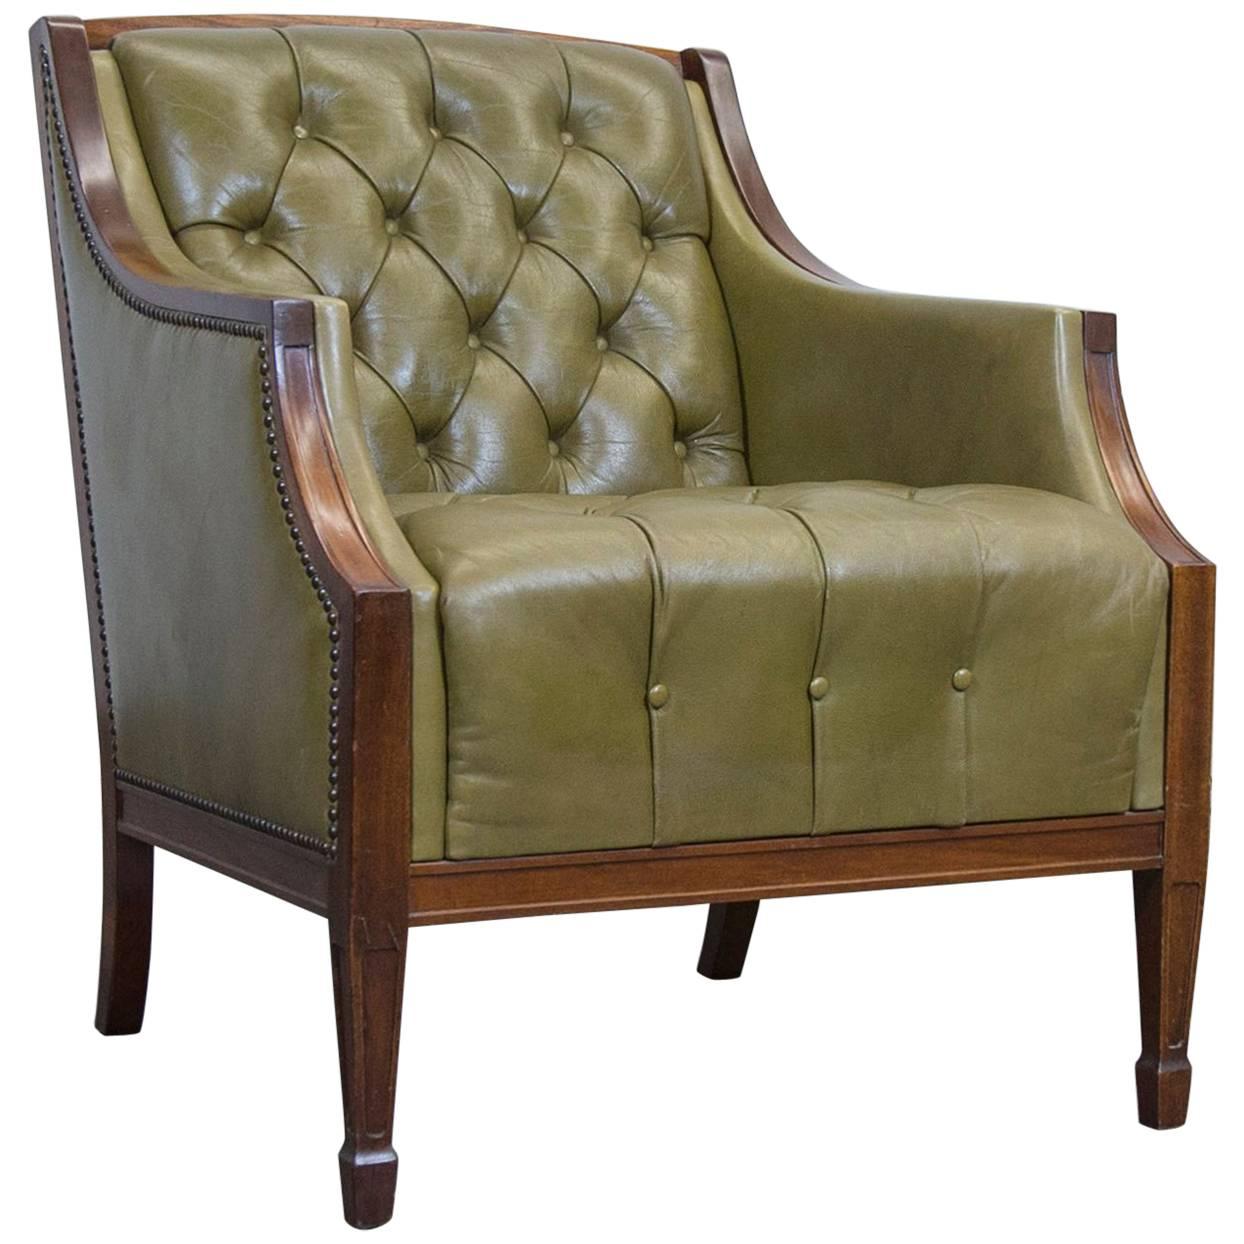 Chesterfield Leather Armchair Green One-Seat Chair Vintage Retro